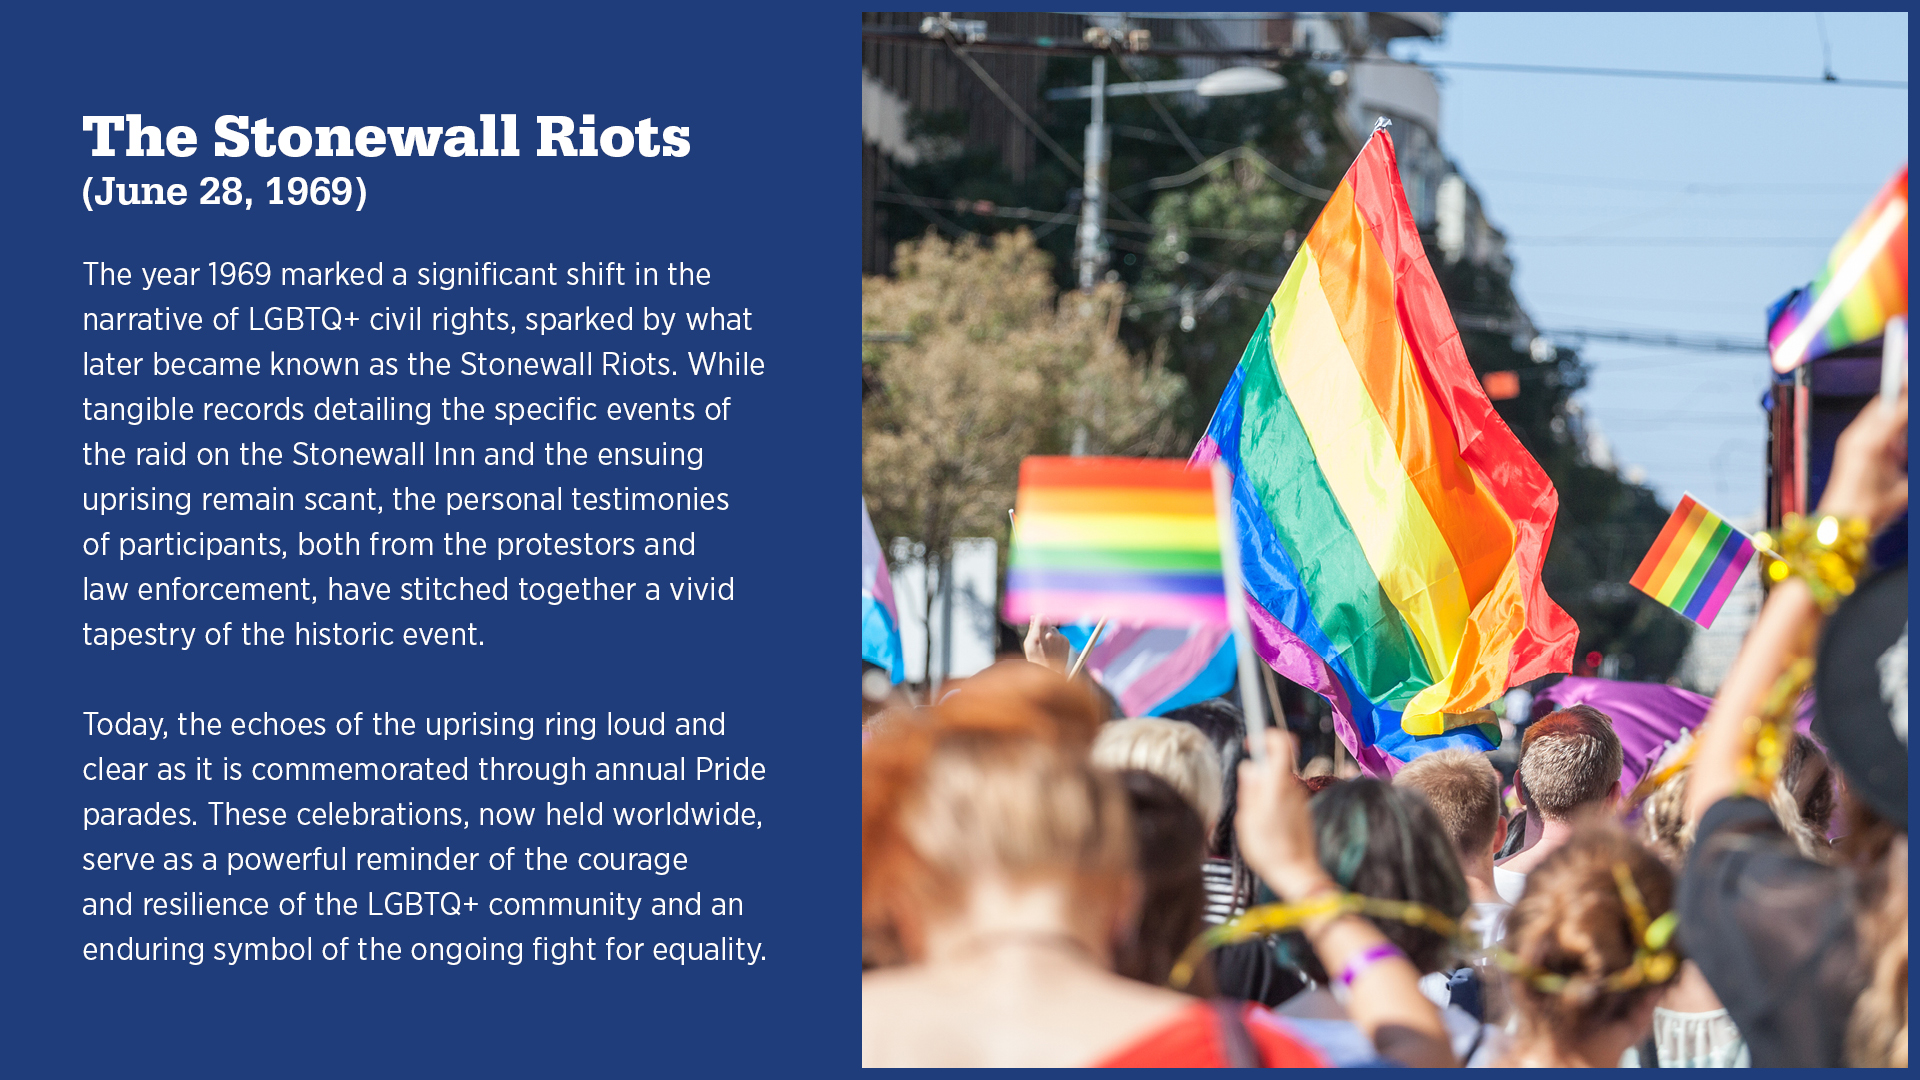 The Stonewall Riots (June 28, 1969)

The year 1969 marked a significant shift in the narrative of LGBTQ+ civil rights, sparked by what later became known as the Stonewall Riots. While tangible records detailing the specific events of the raid on the Stonewall Inn and the ensuing uprising remain scant, the personal testimonies of participants, both from the protestors and law enforcement, have stitched together a vivid tapestry of the historic event.

Today, the echoes of the uprising ring loud and clear as it is commemorated through annual Pride parades. These celebrations, now held worldwide, serve as a powerful reminder of the courage and resilience of the LGBTQ+ community and an enduring symbol of the ongoing fight for equality.
